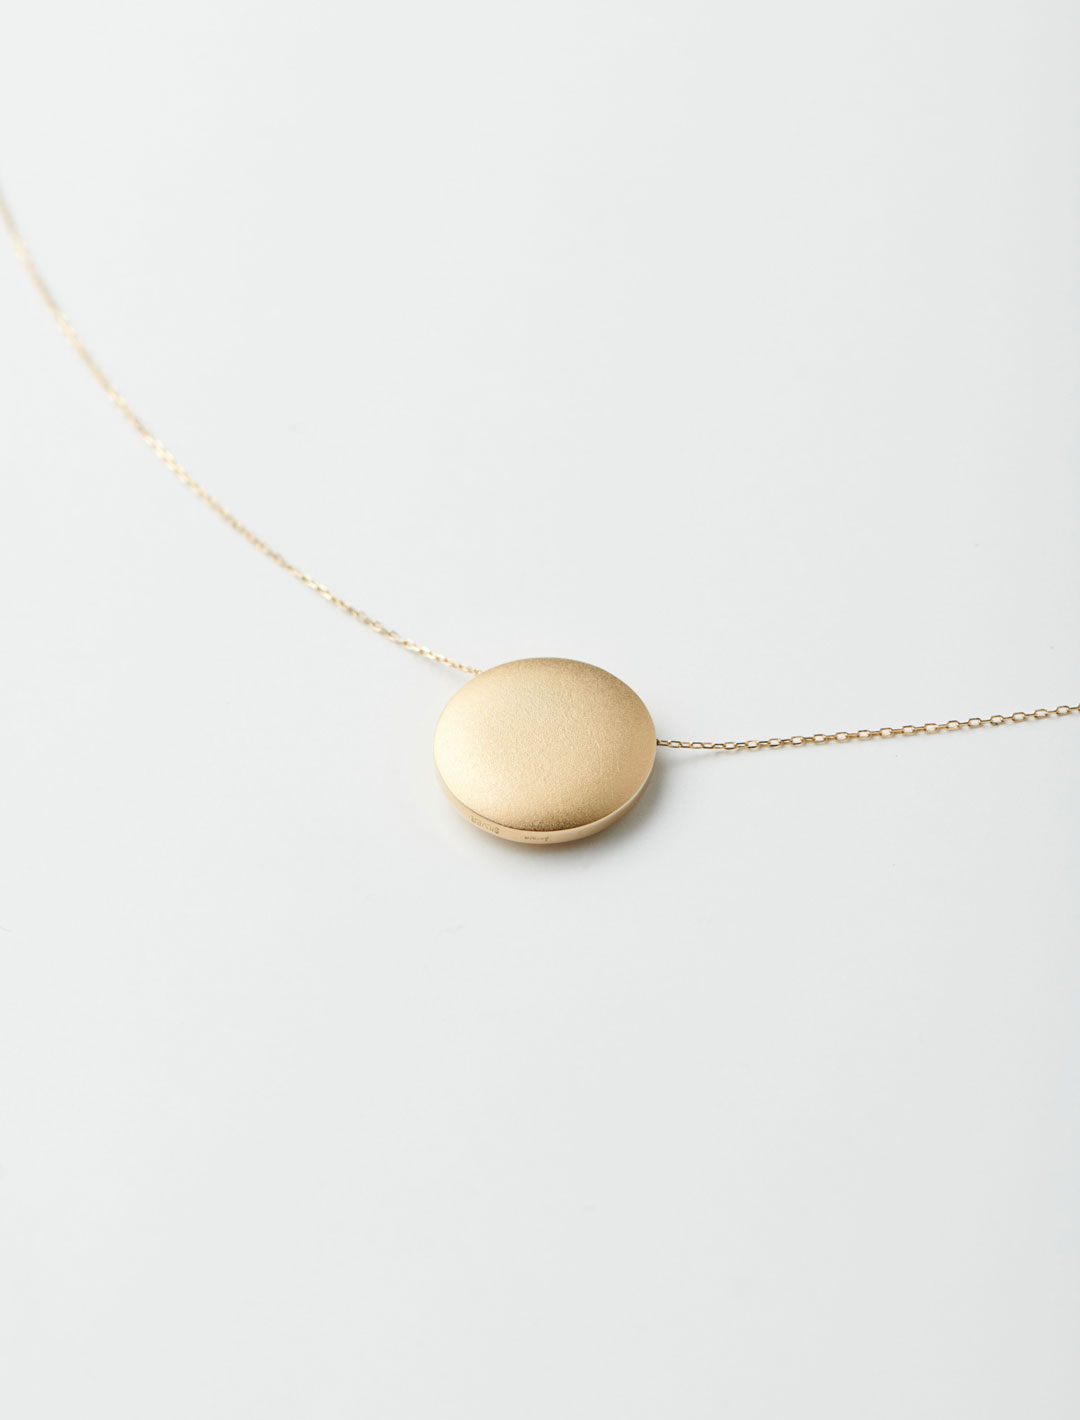 MIRROR Necklace S 45cm - Yellow Gold